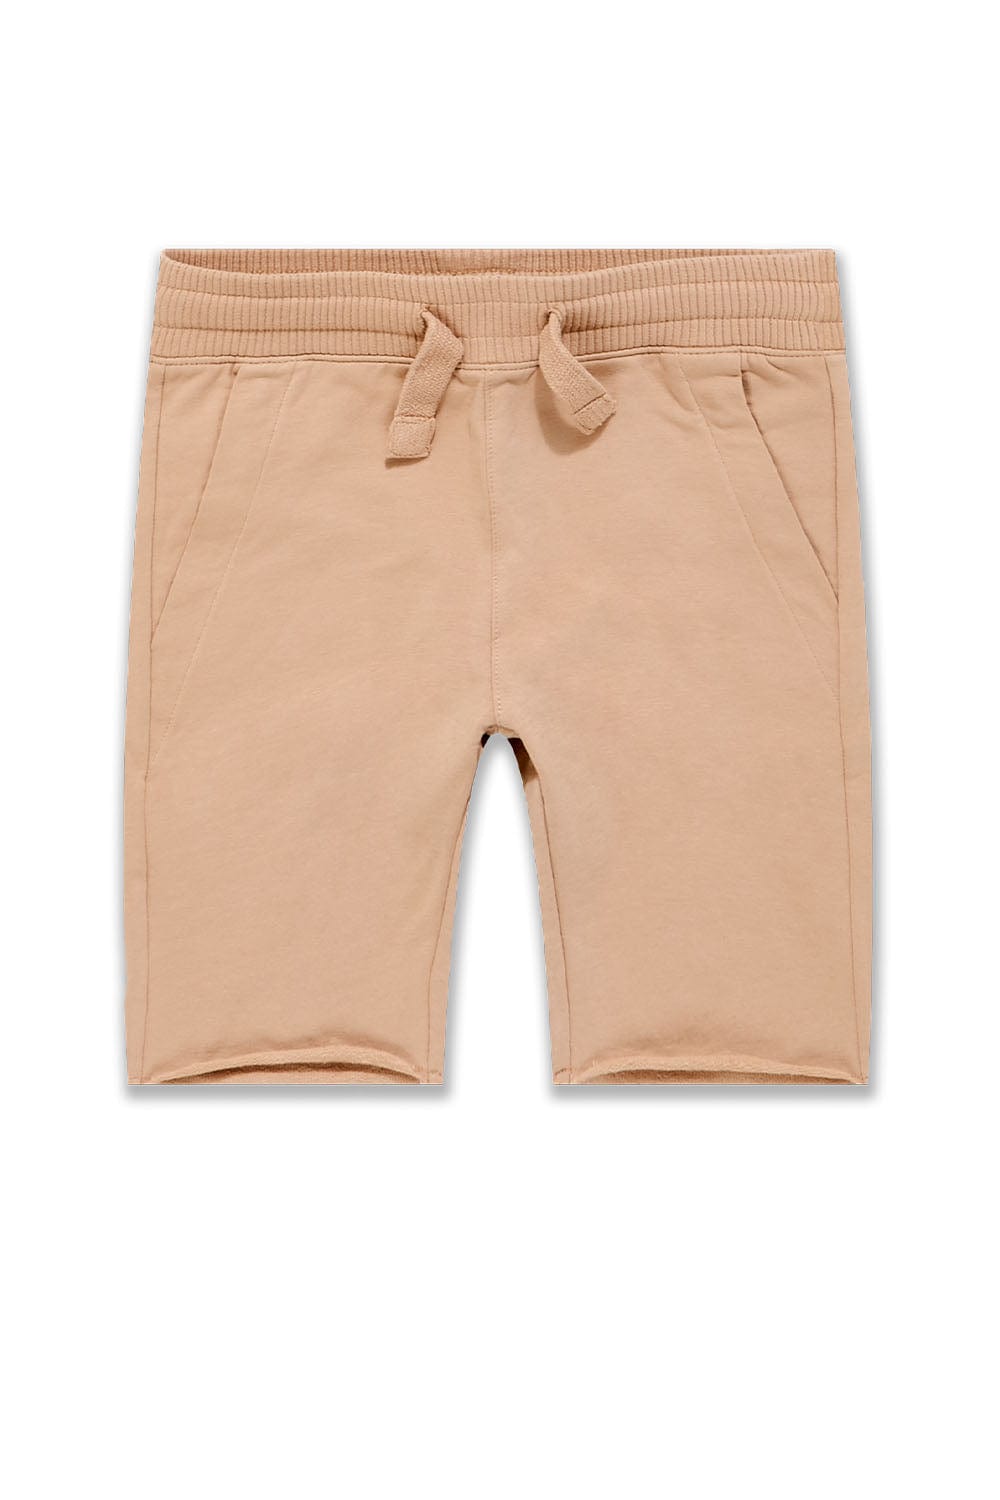 JC Kids Kids Palma French Terry Shorts (Name Your Price) Clay / 2